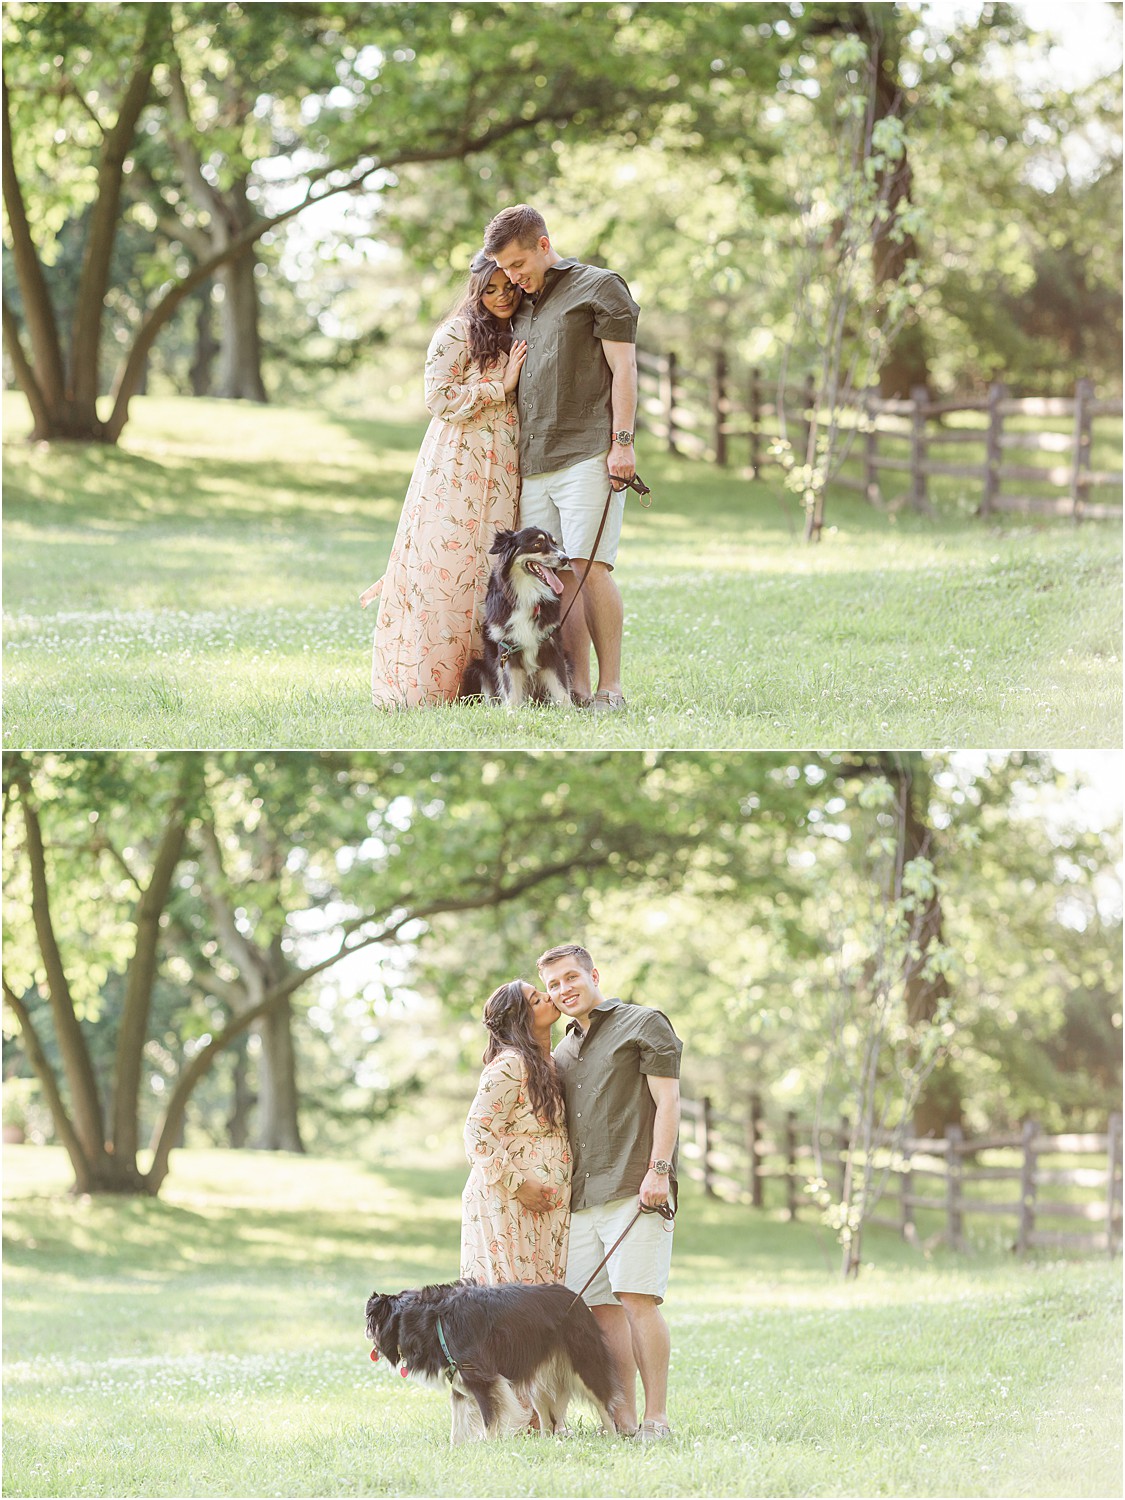 couple with their dog at Bartram’s Garden in Philadelphia, PA captured by Jocelyn Cruz Photography